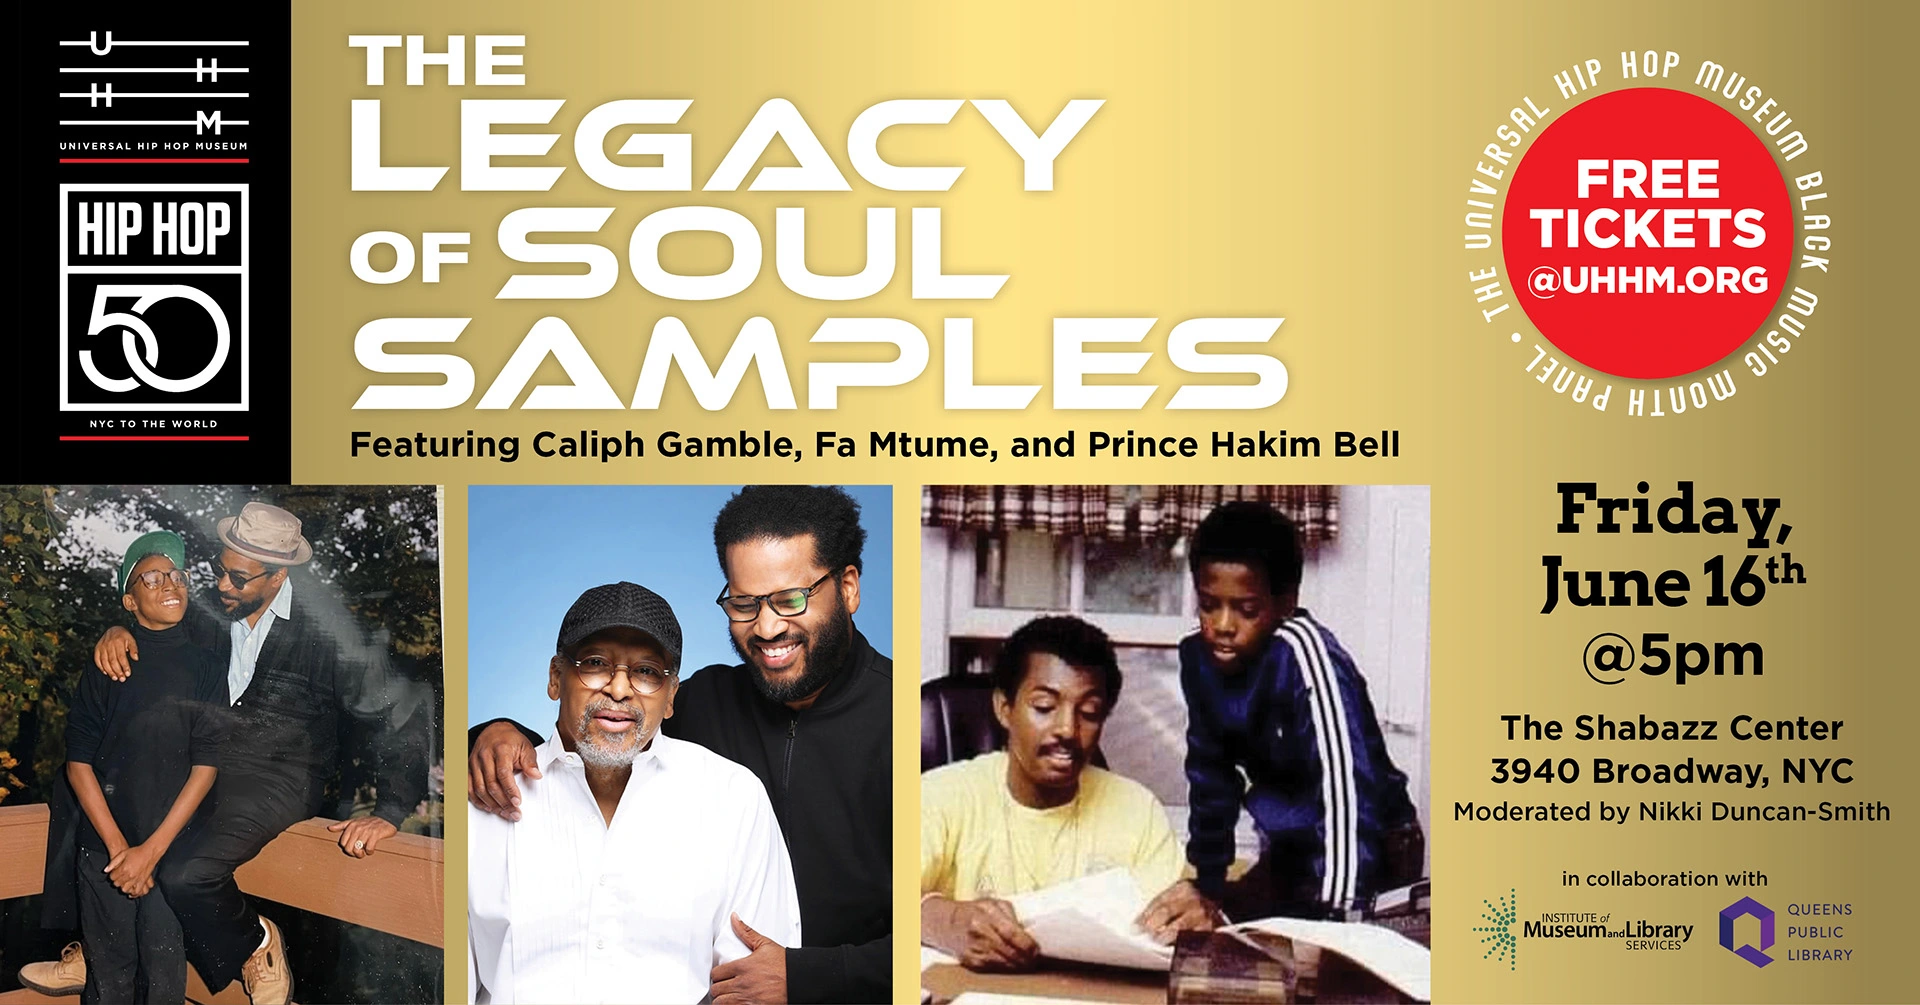 The Legacy of Soul Samples